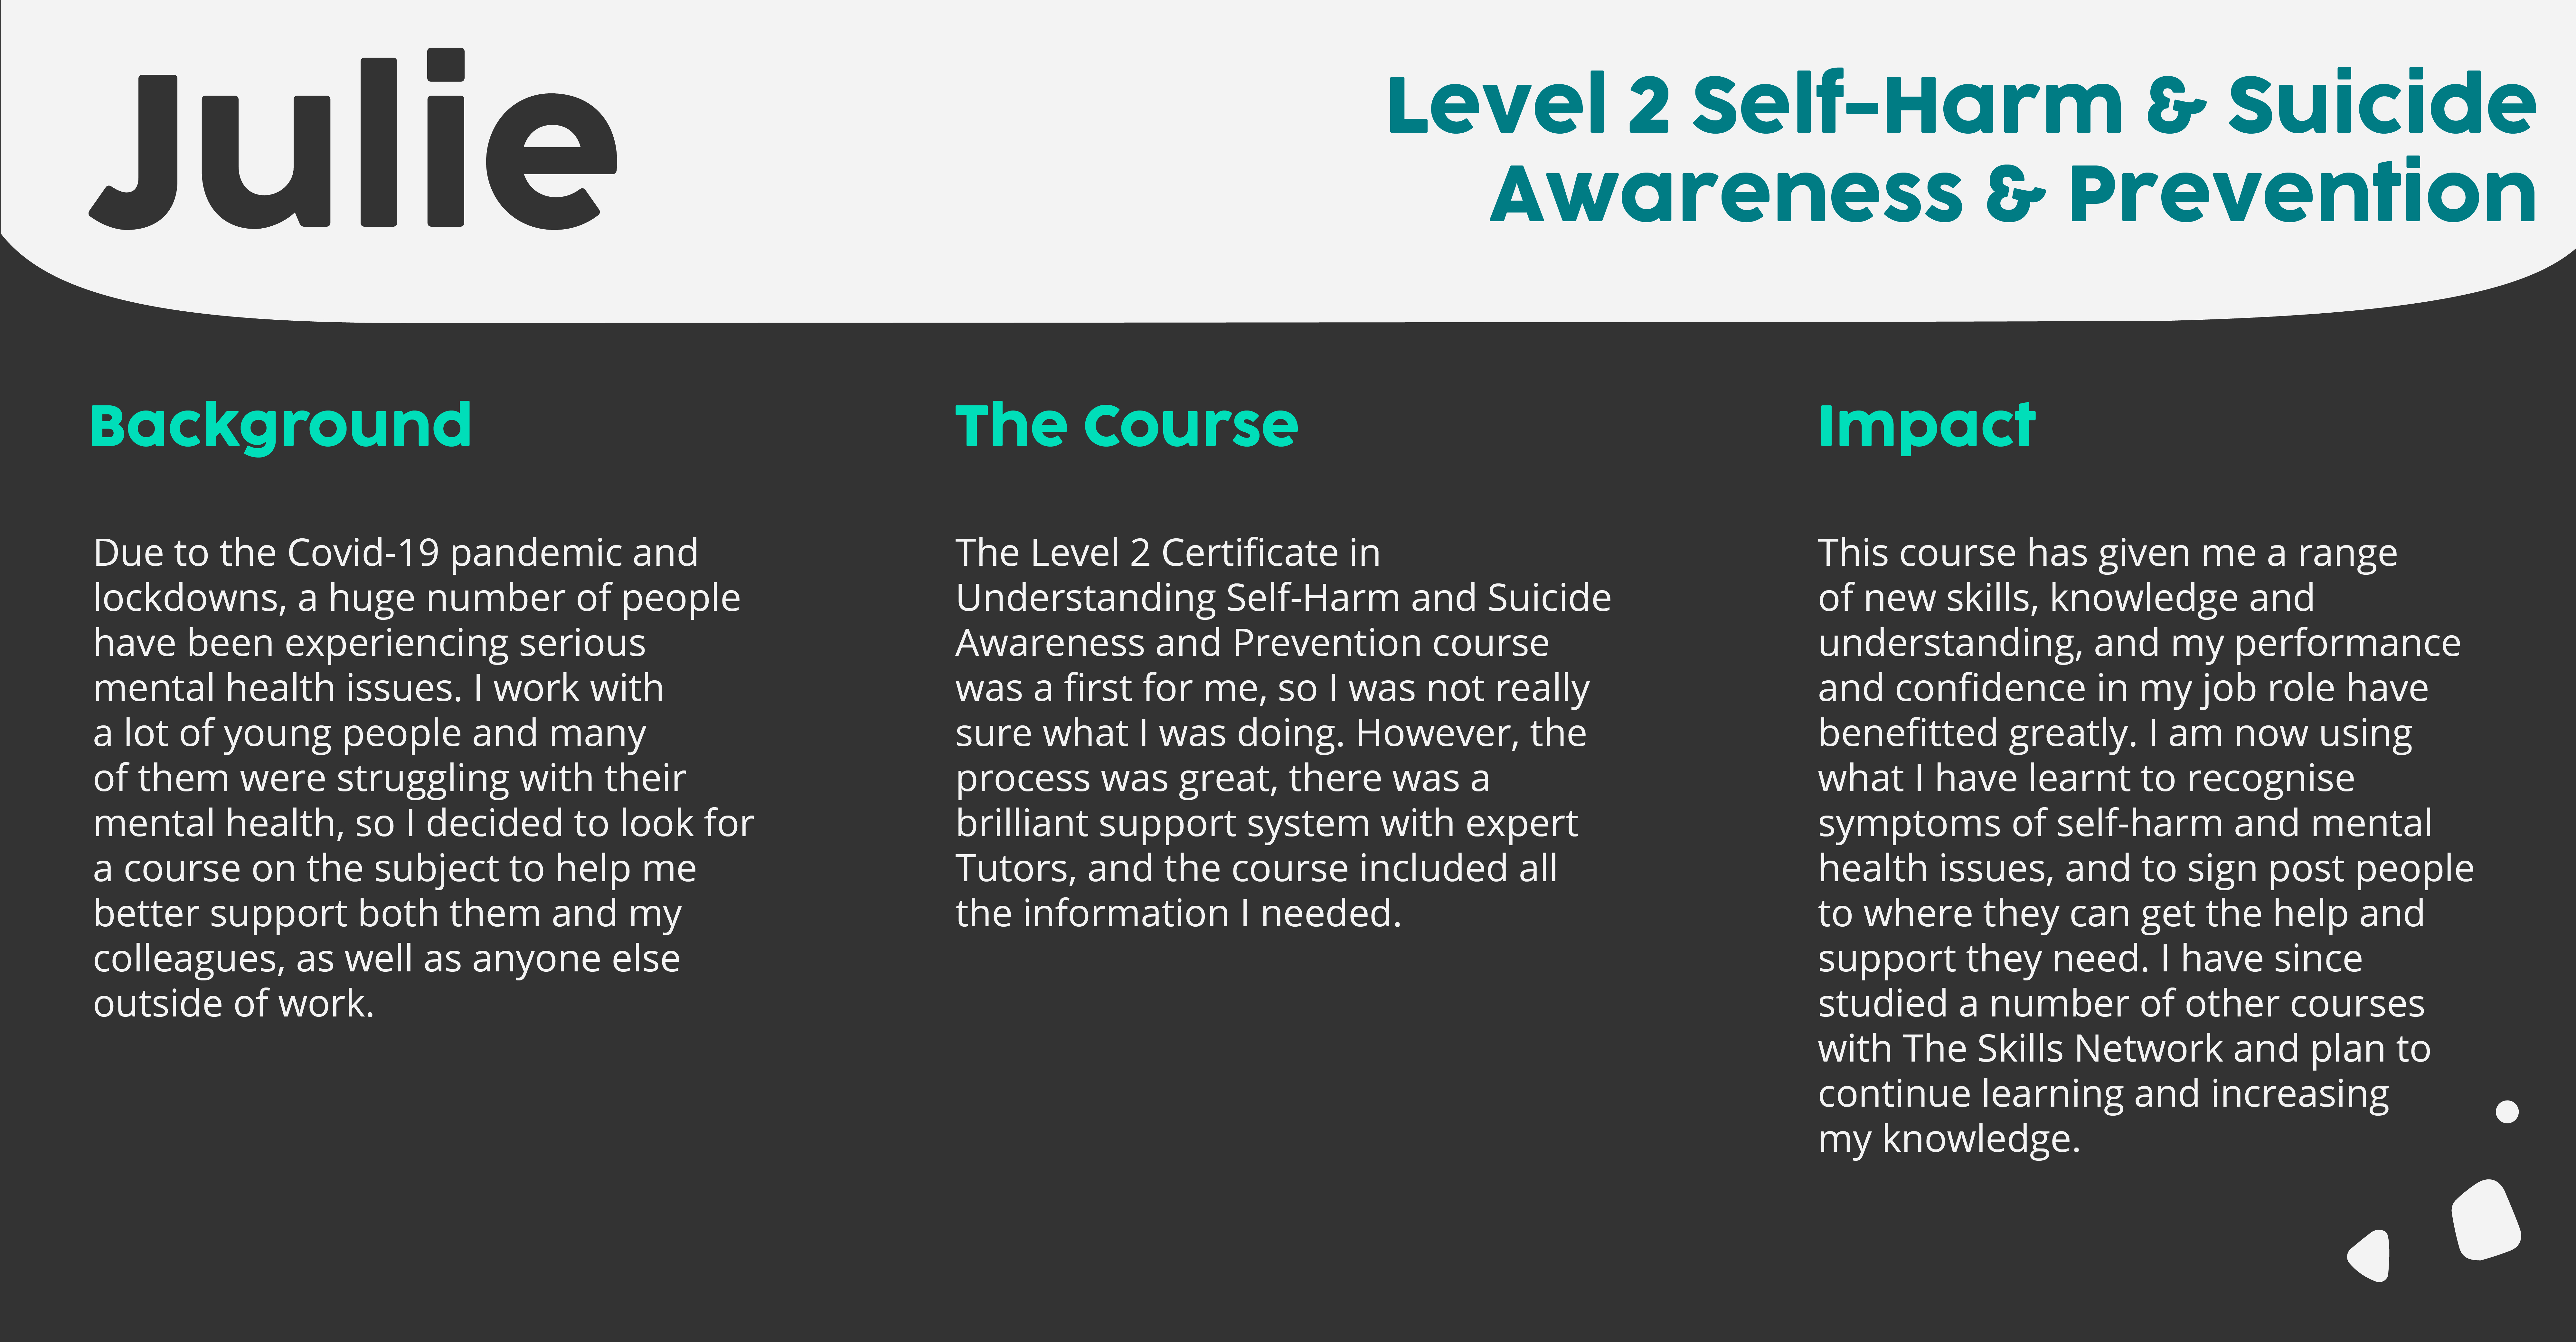 Julie's experience of Level 2 Suicide Prevention course